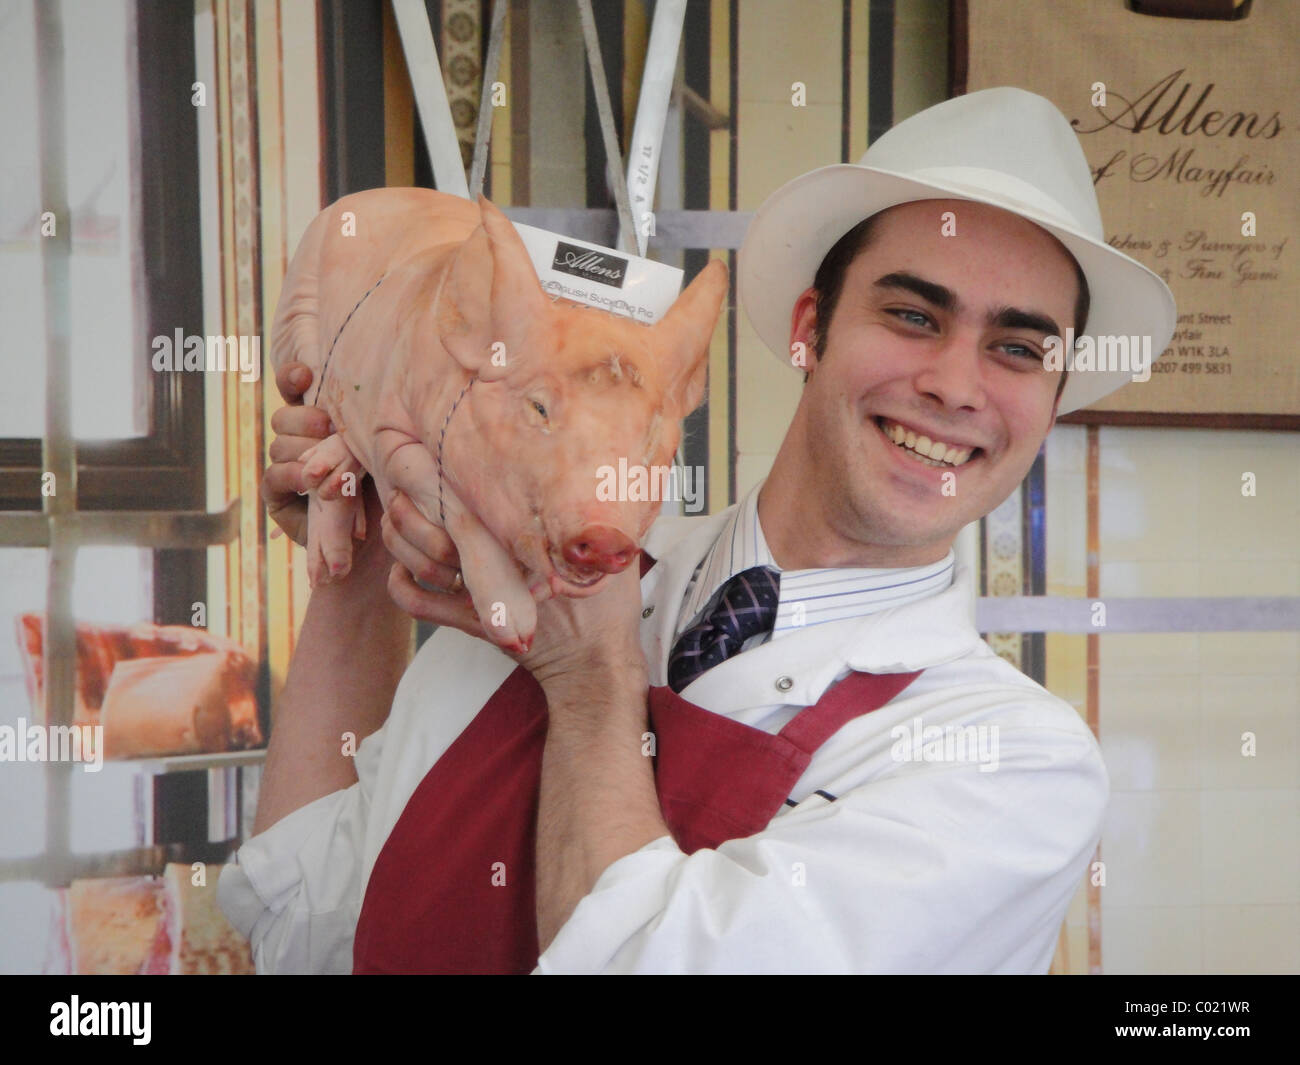 Butcher holding a whole piglet at a food show Stock Photo